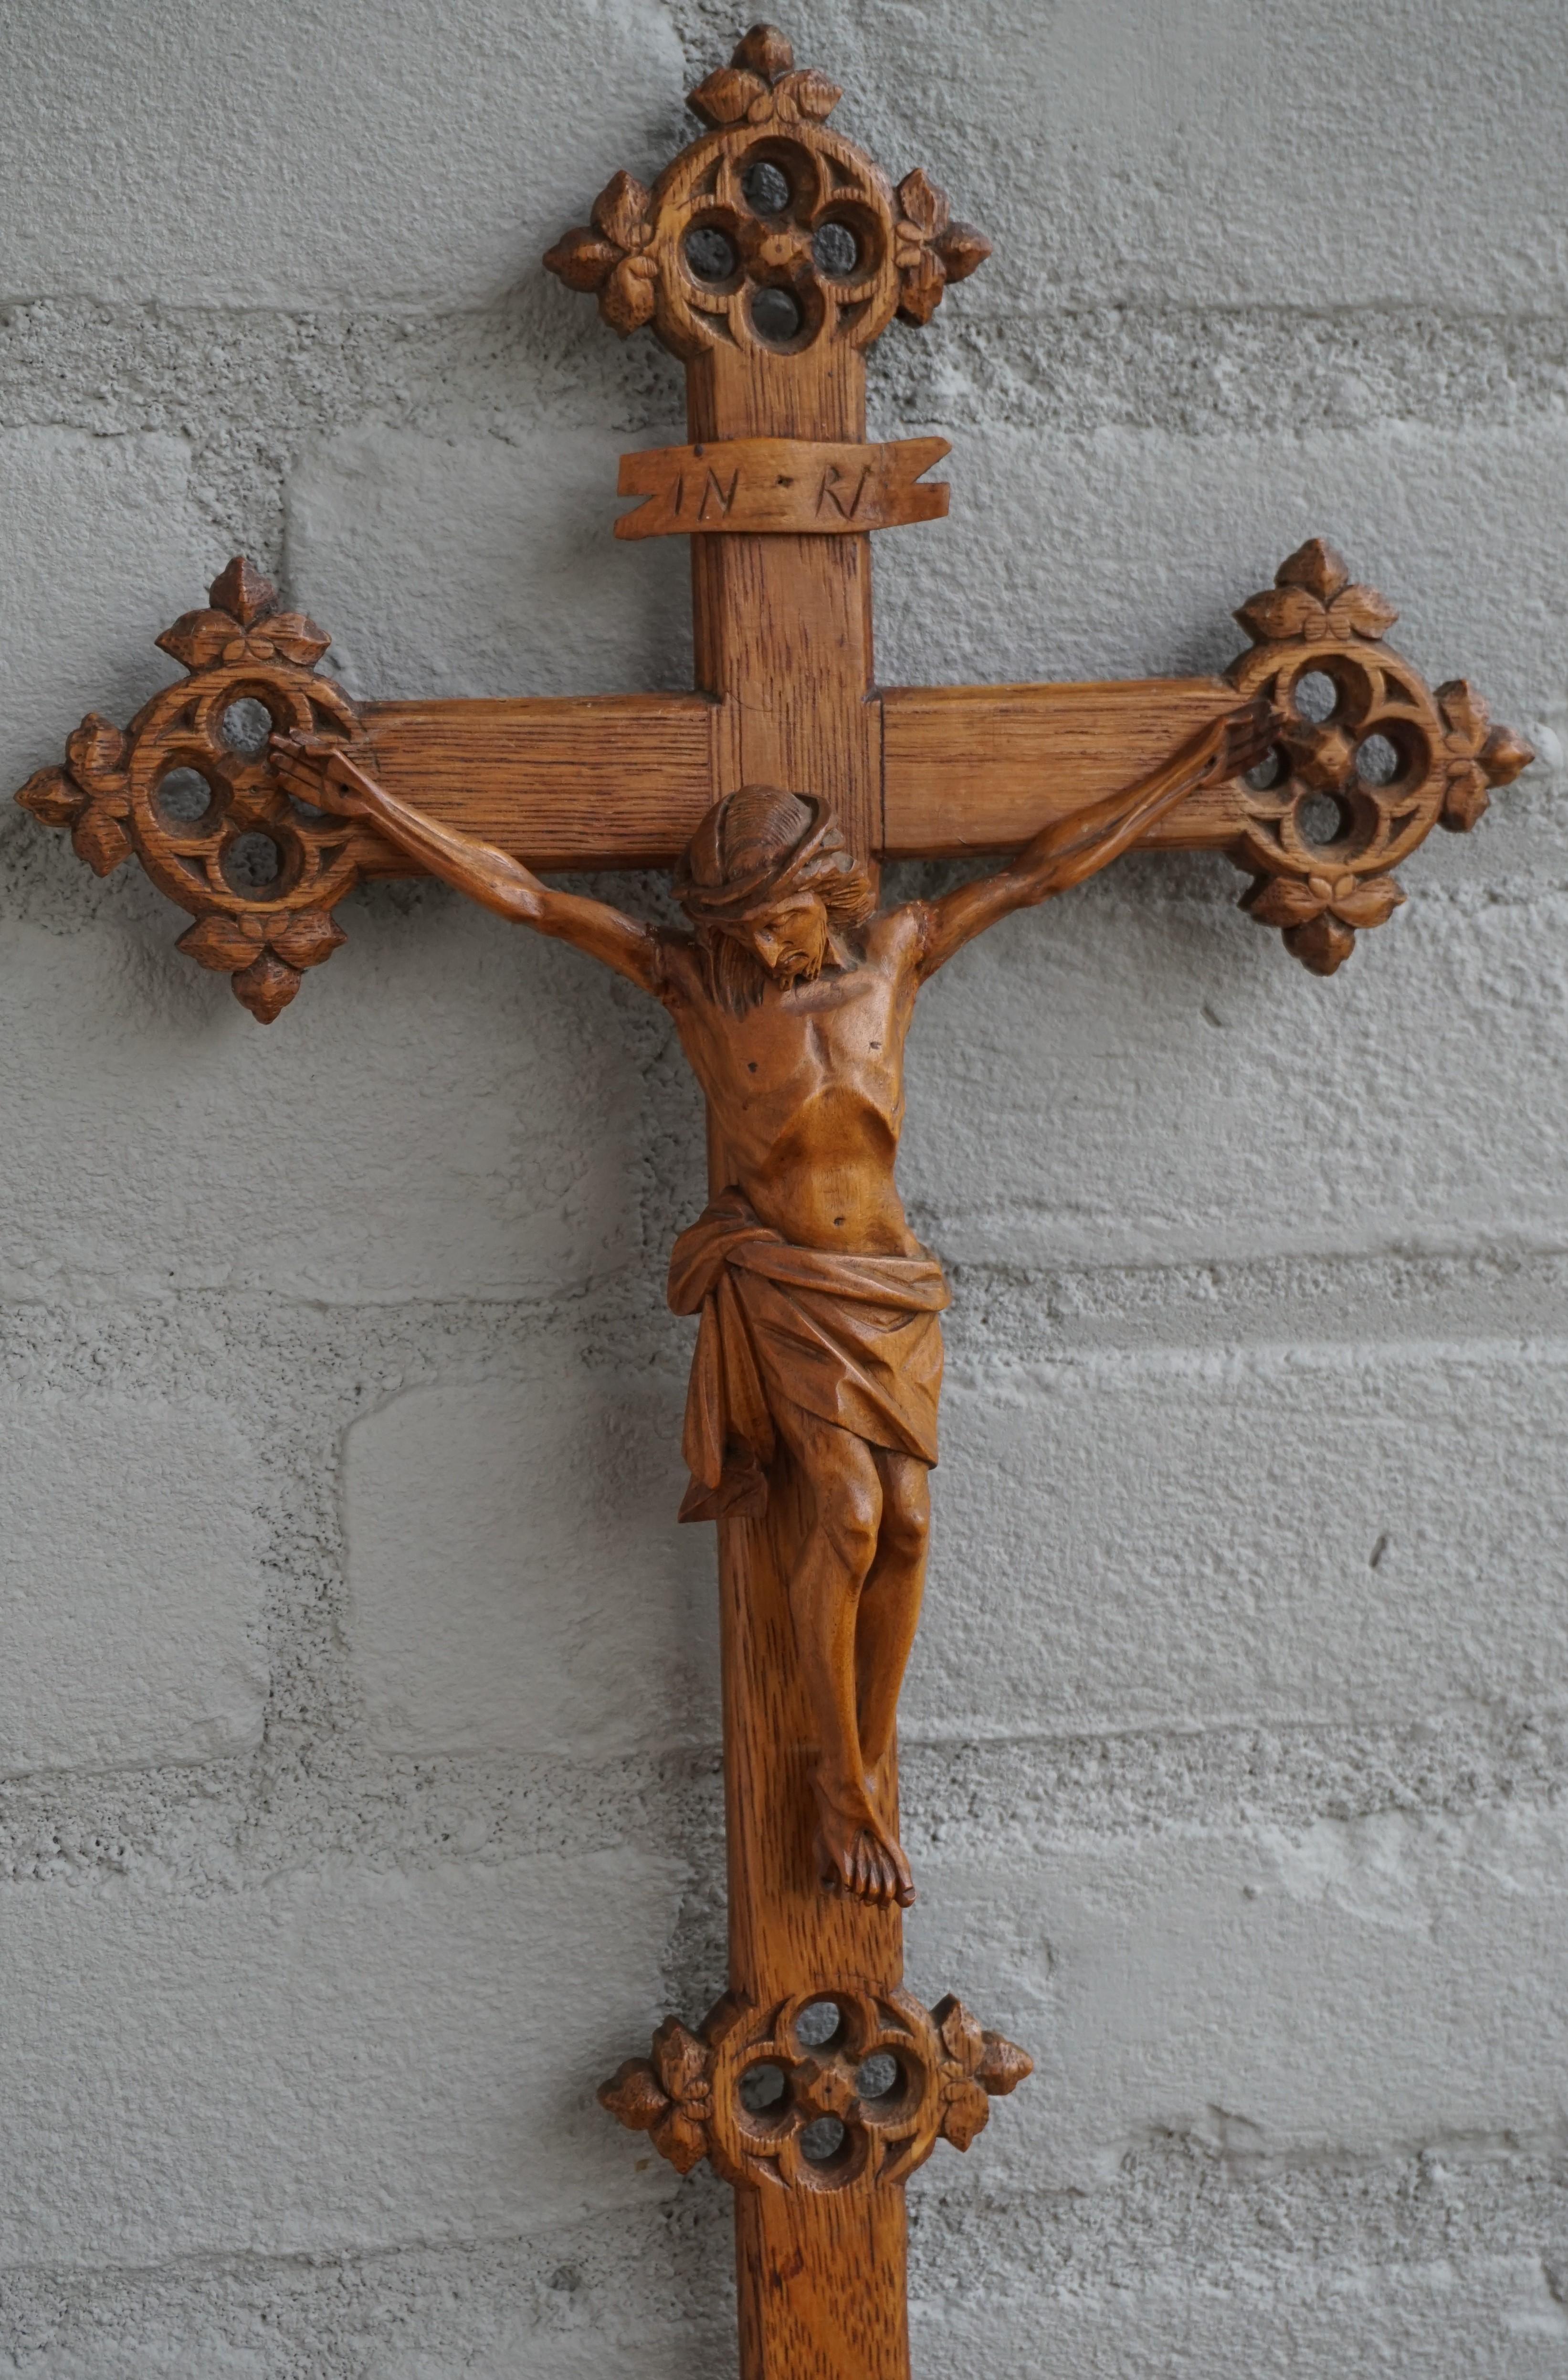 Gothic style church crucifix with an incredibly detailed corpus of Christ.

What makes this stylish crucifix extra rare are the Gothic elements that are hand carved on the ends of each side of the cross and also in the base. This medieval style